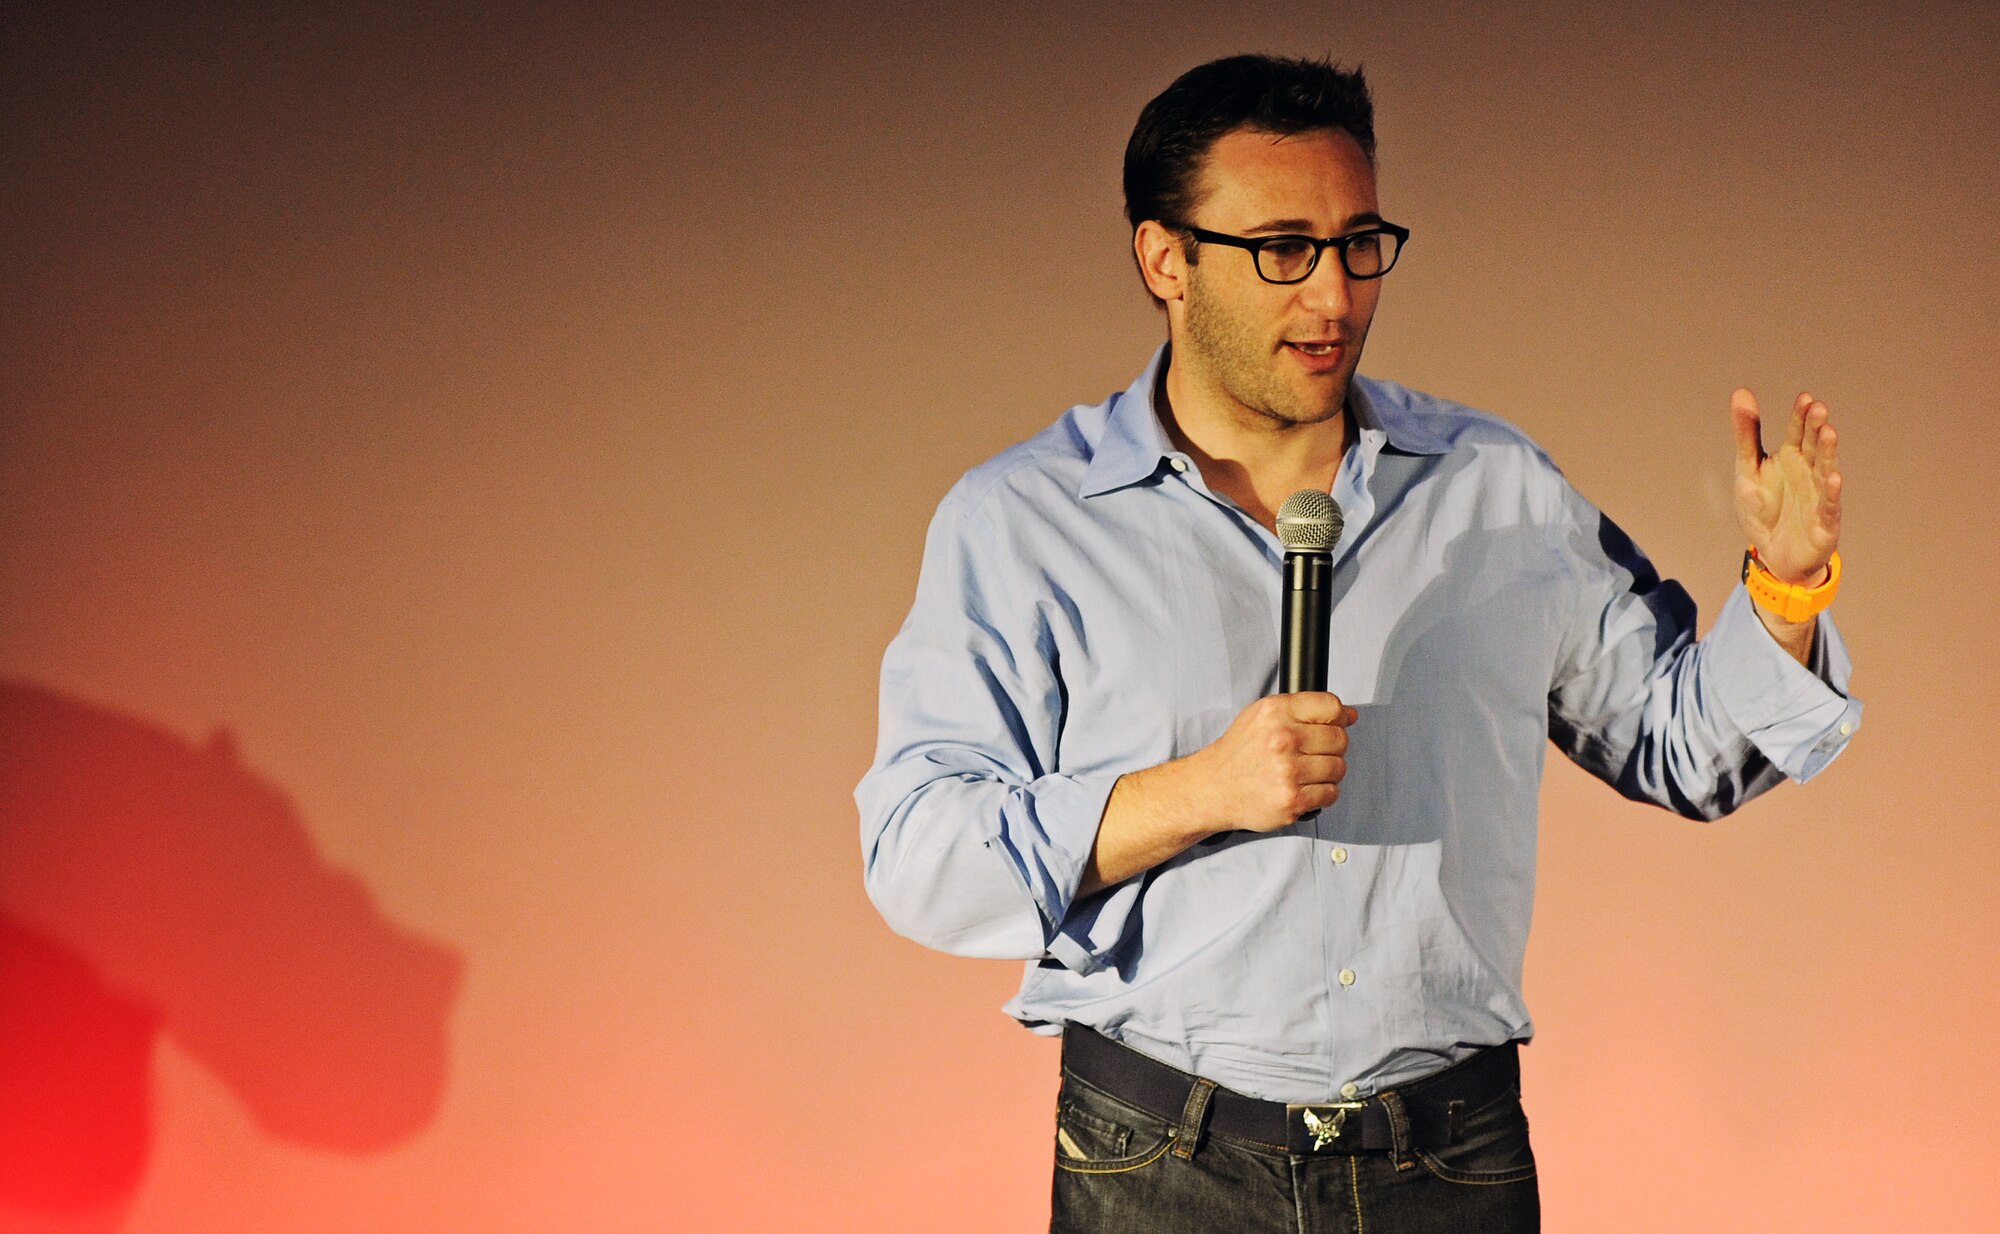 Simon Sinek, event emcee and public speaker gives the audience an introduction to the TEDx event at Scott Air Force Base, Ill. May 30. With a bold goal to help build a world in which the vast majority of people go home everyday feeling fulfilled by their work, Sinek is leading a movement to inspire people to do the things that inspire them. (U.S. Air Force photo/ Staff Sgt. Ryan Crane)